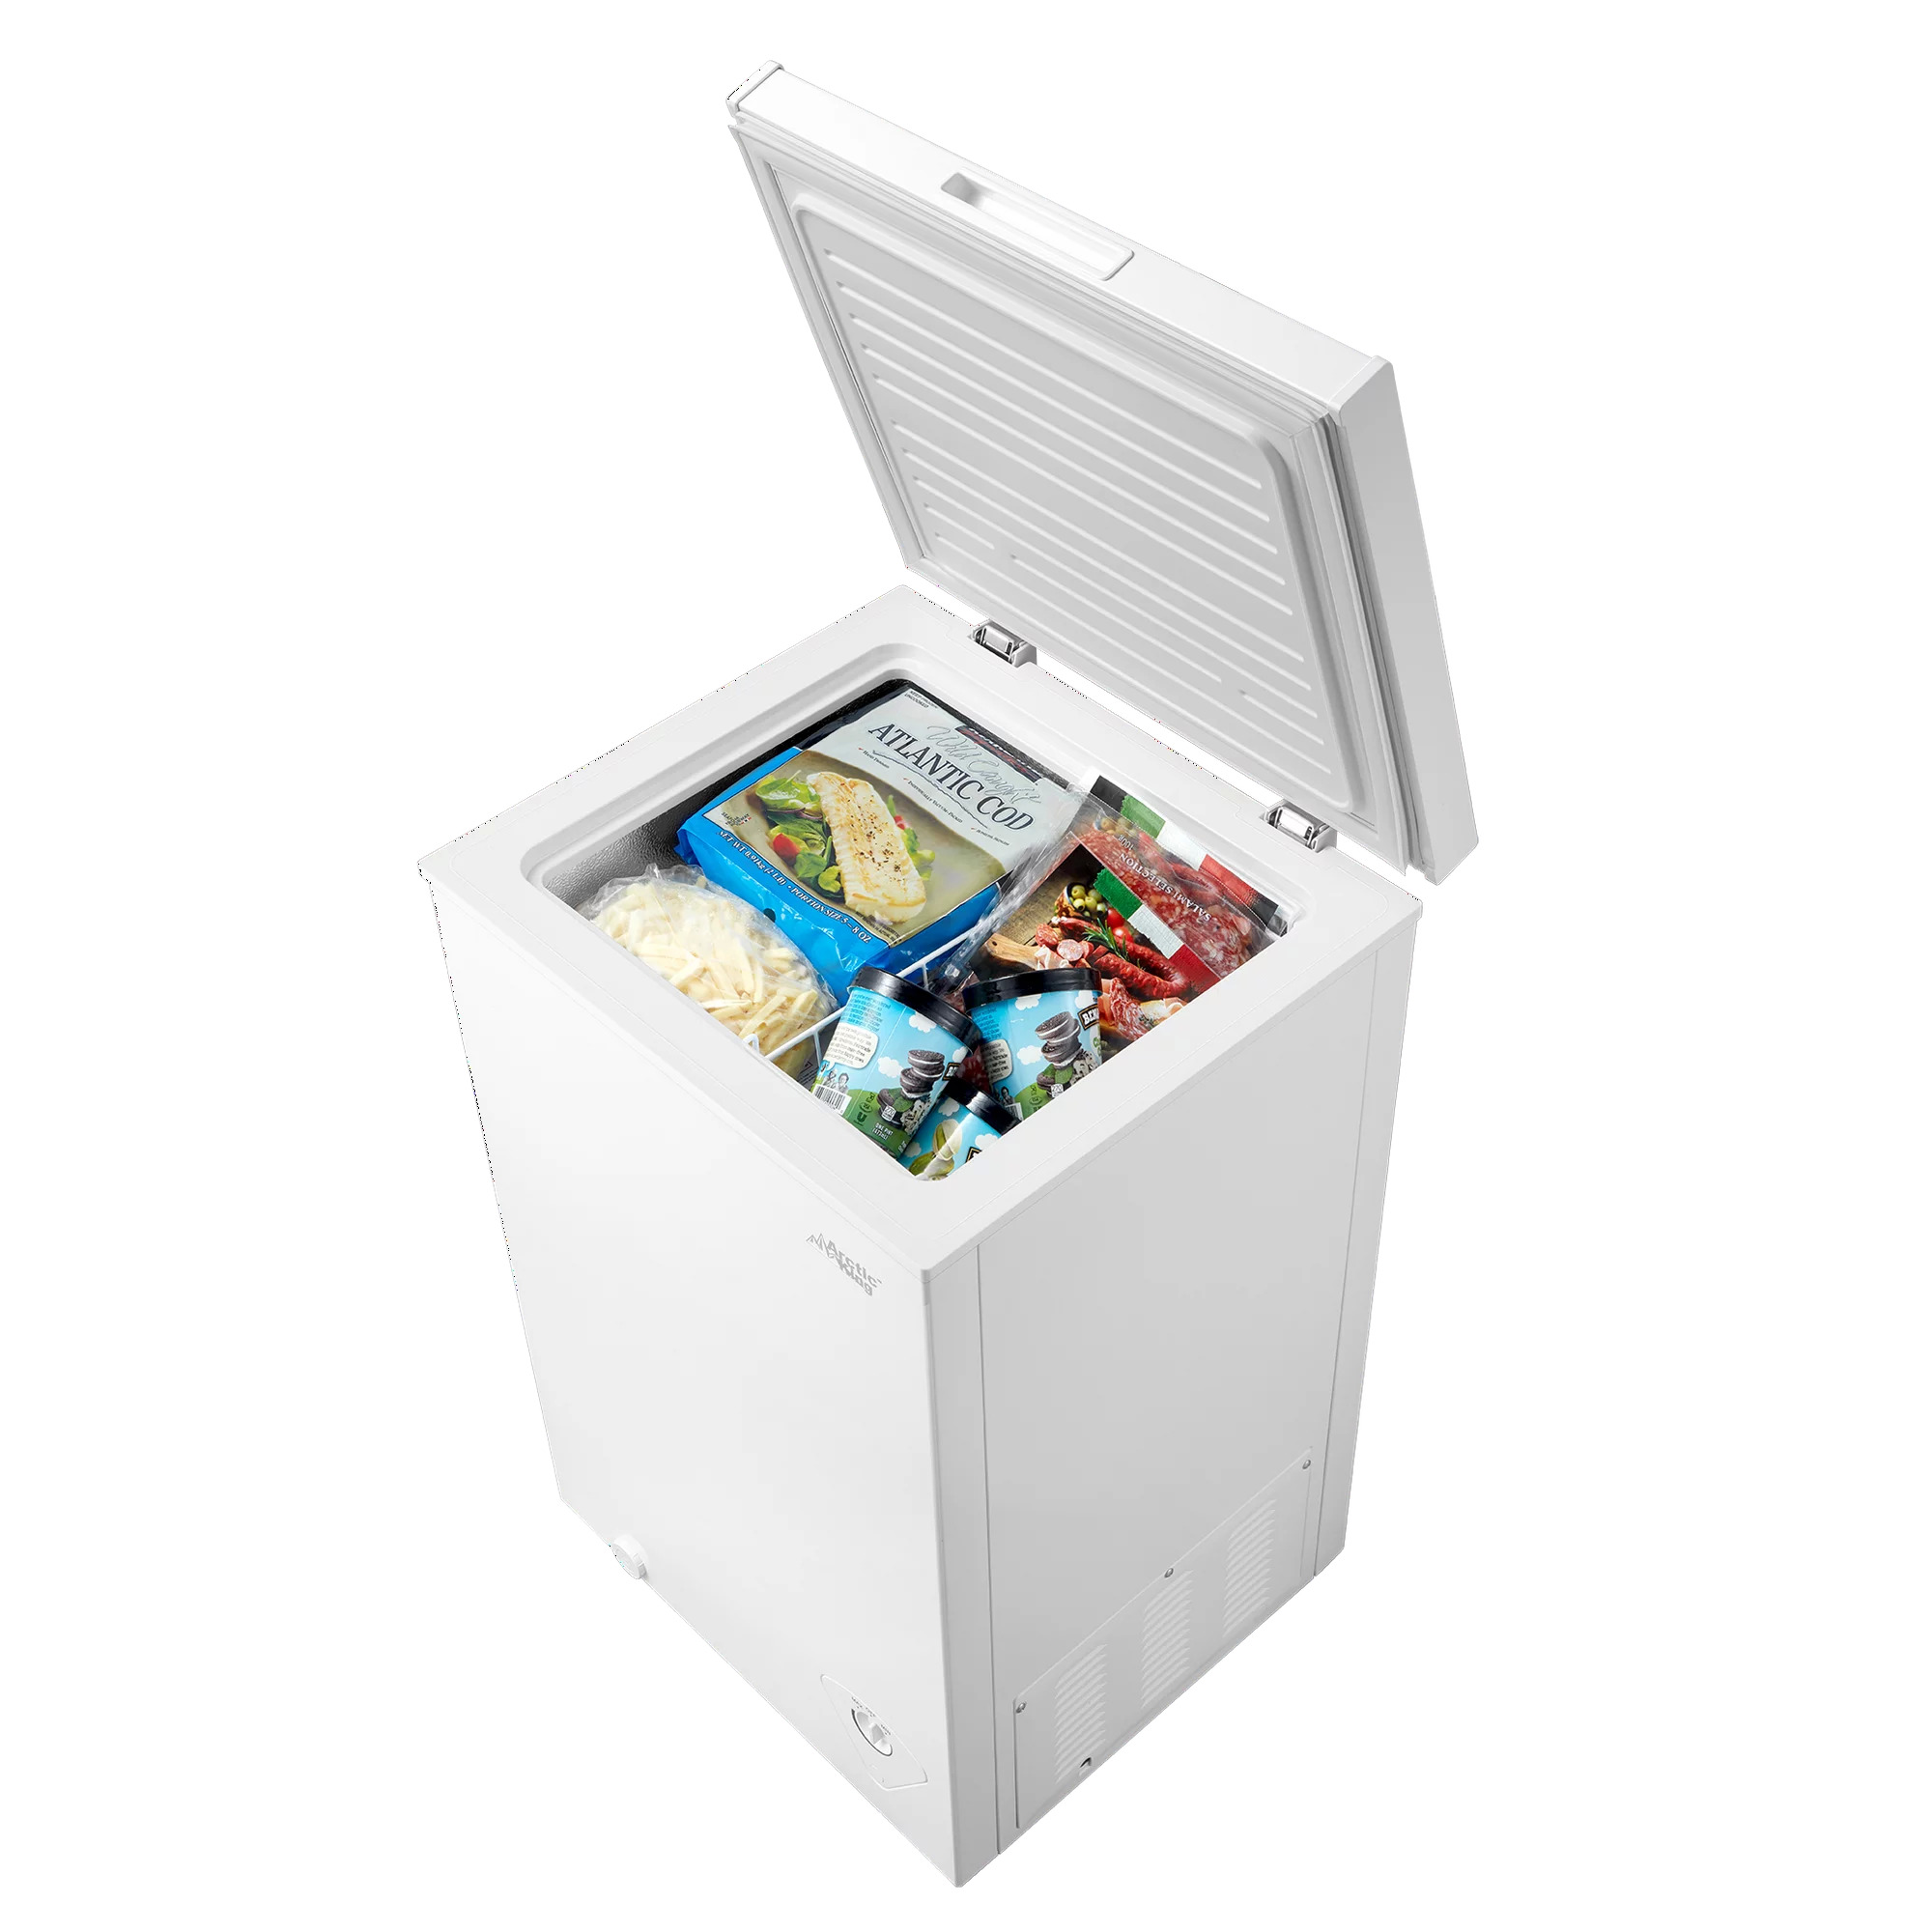 3.5 Cu ft. Arctic King Chest Freezer $118 + Free Shipping